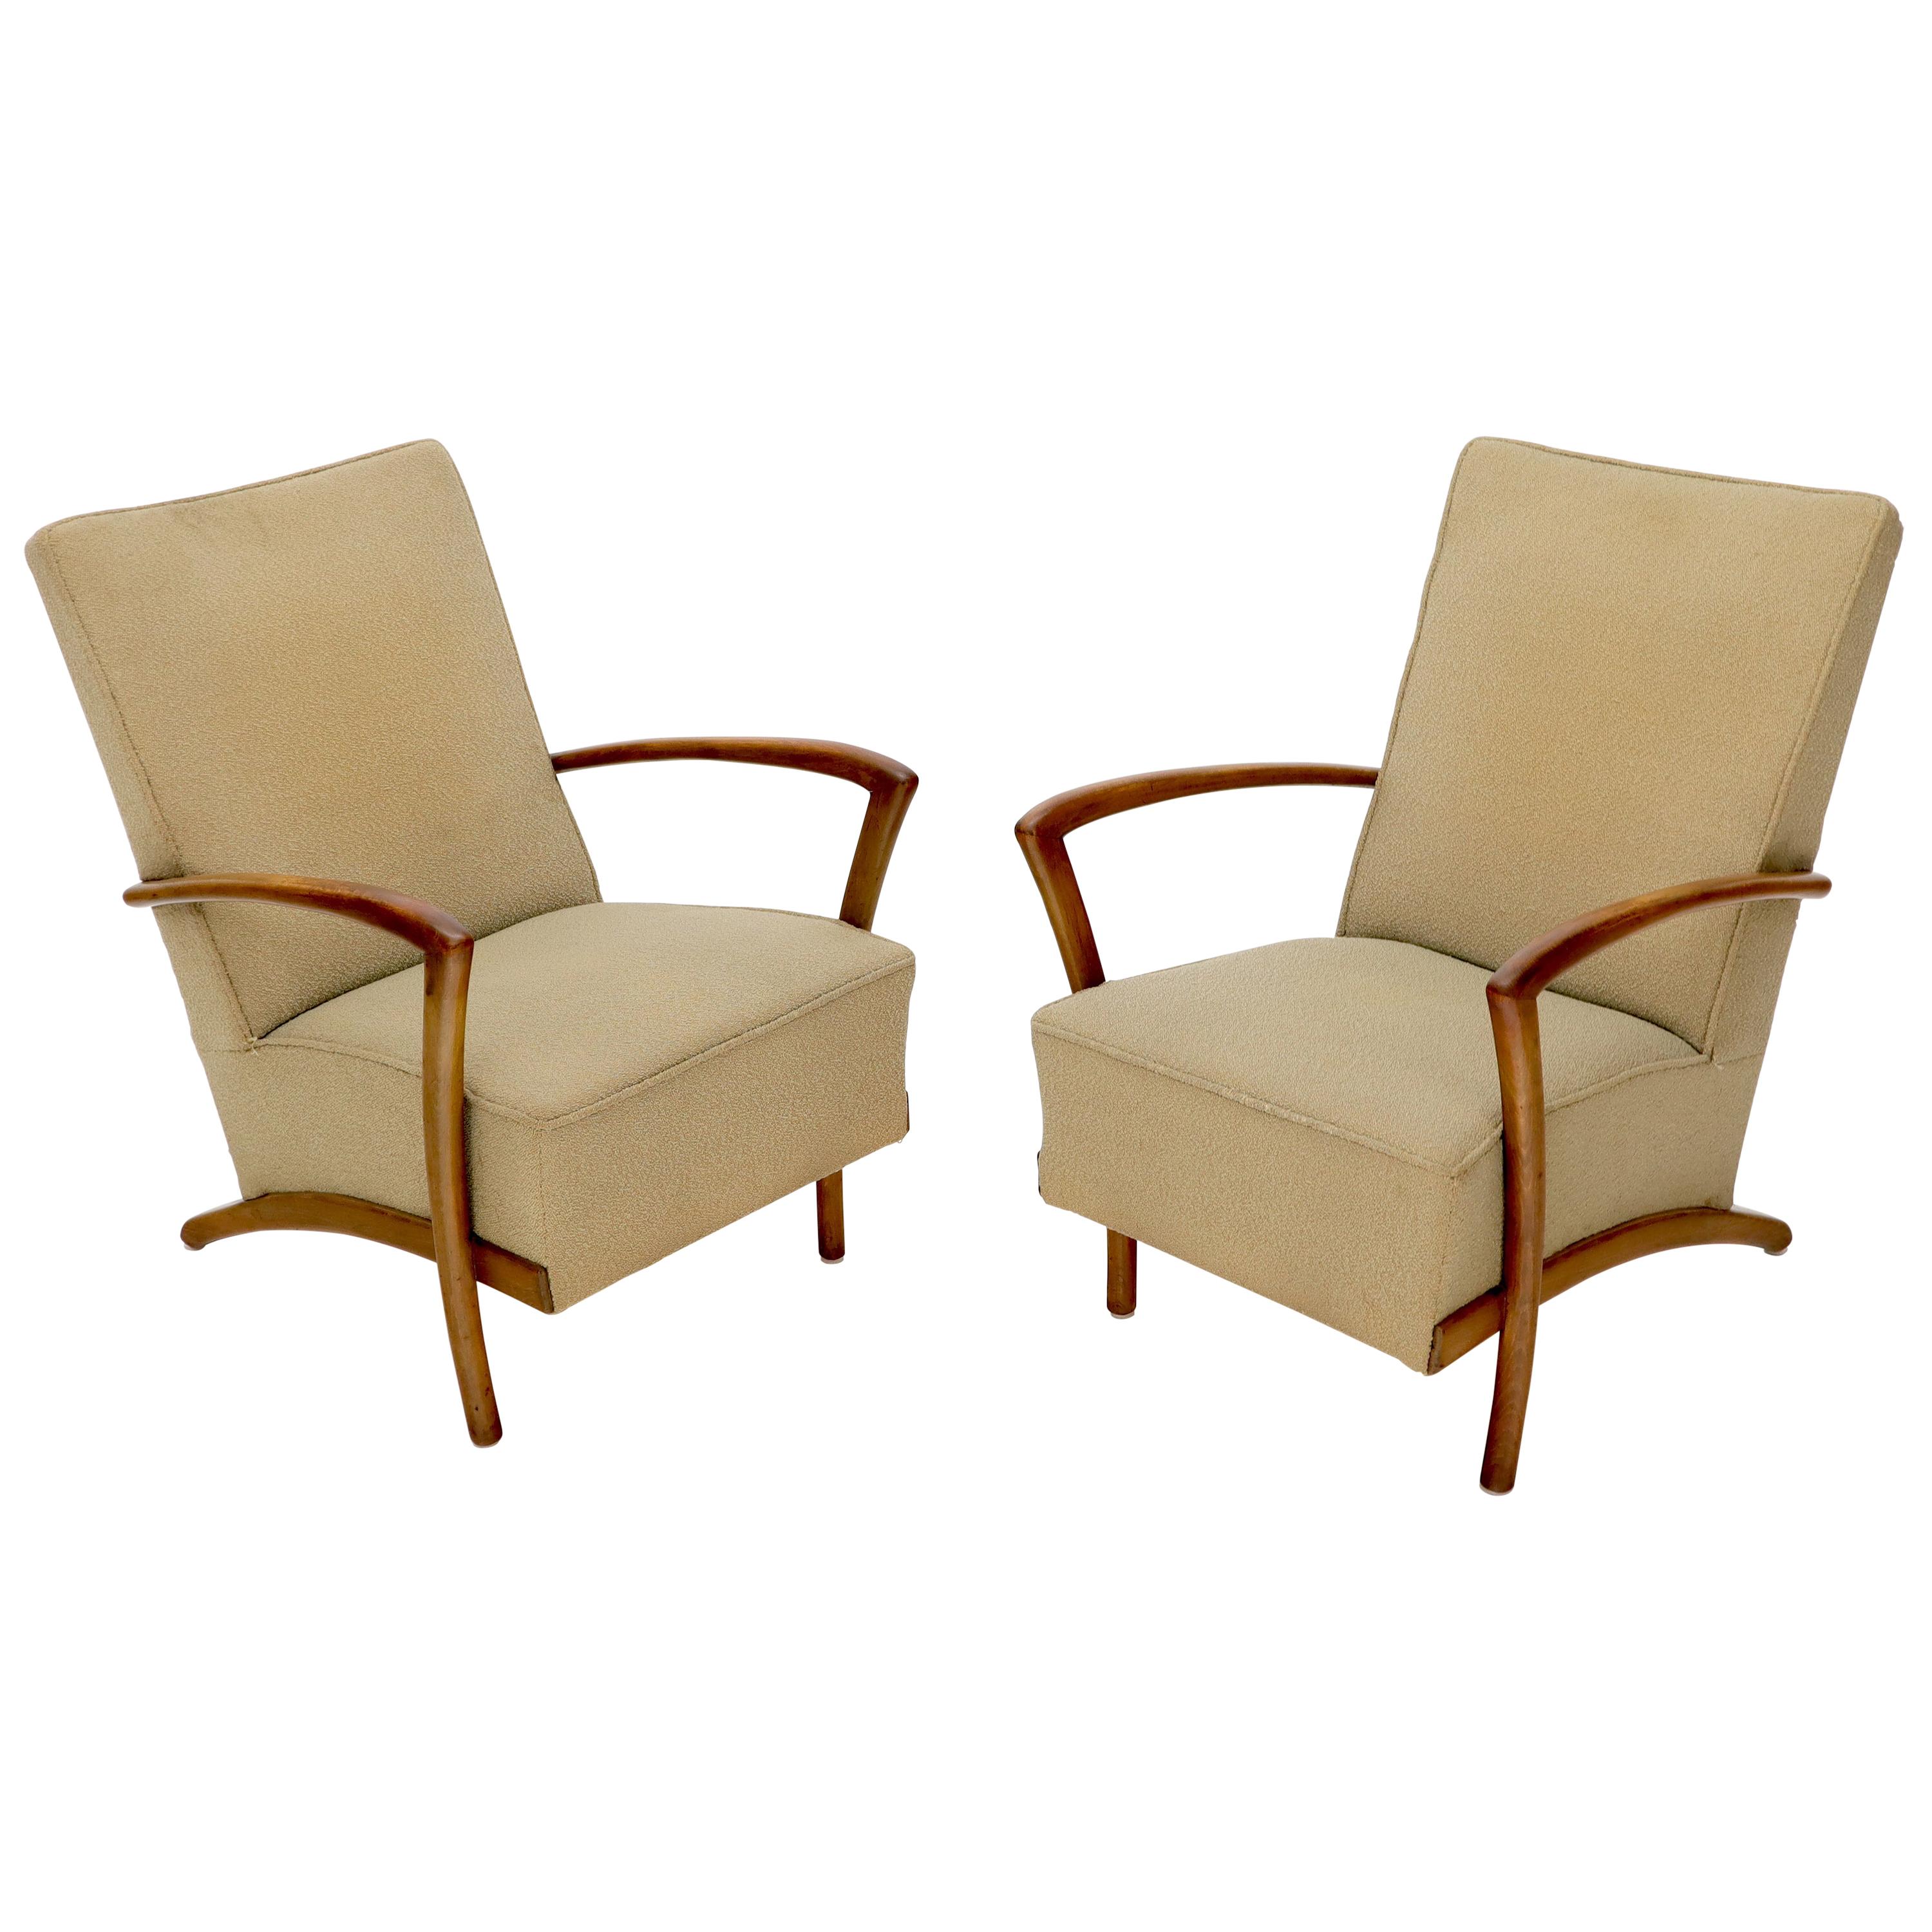 Pair of Italian Spring Loaded Seats Lounge Chairs